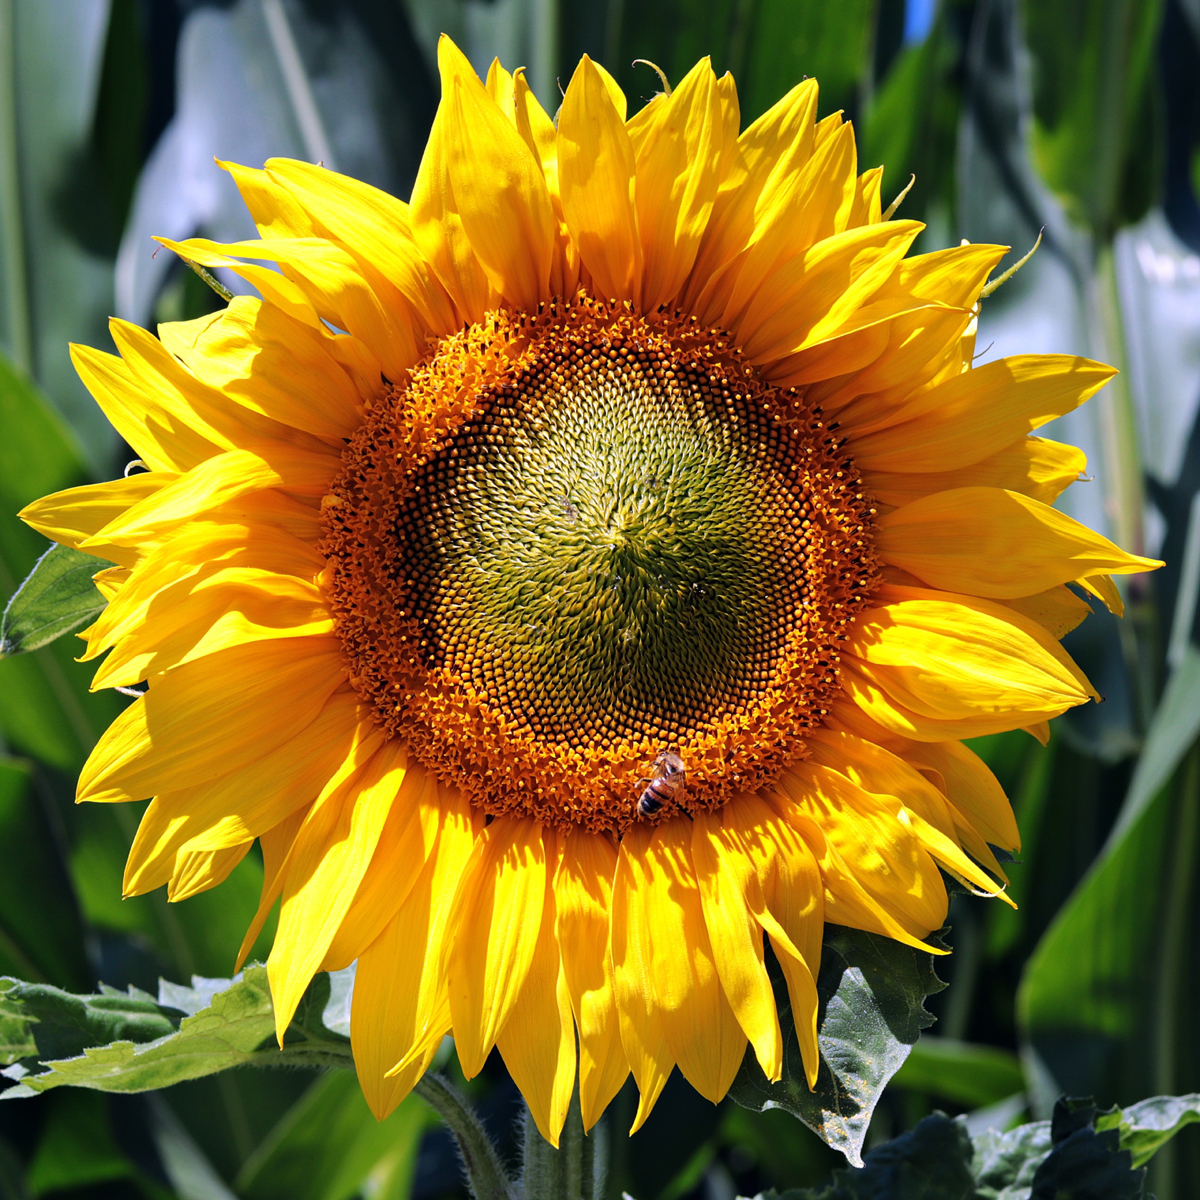 A close up image of a yellow sunflower with a small insect on the center, with green leaves behind it